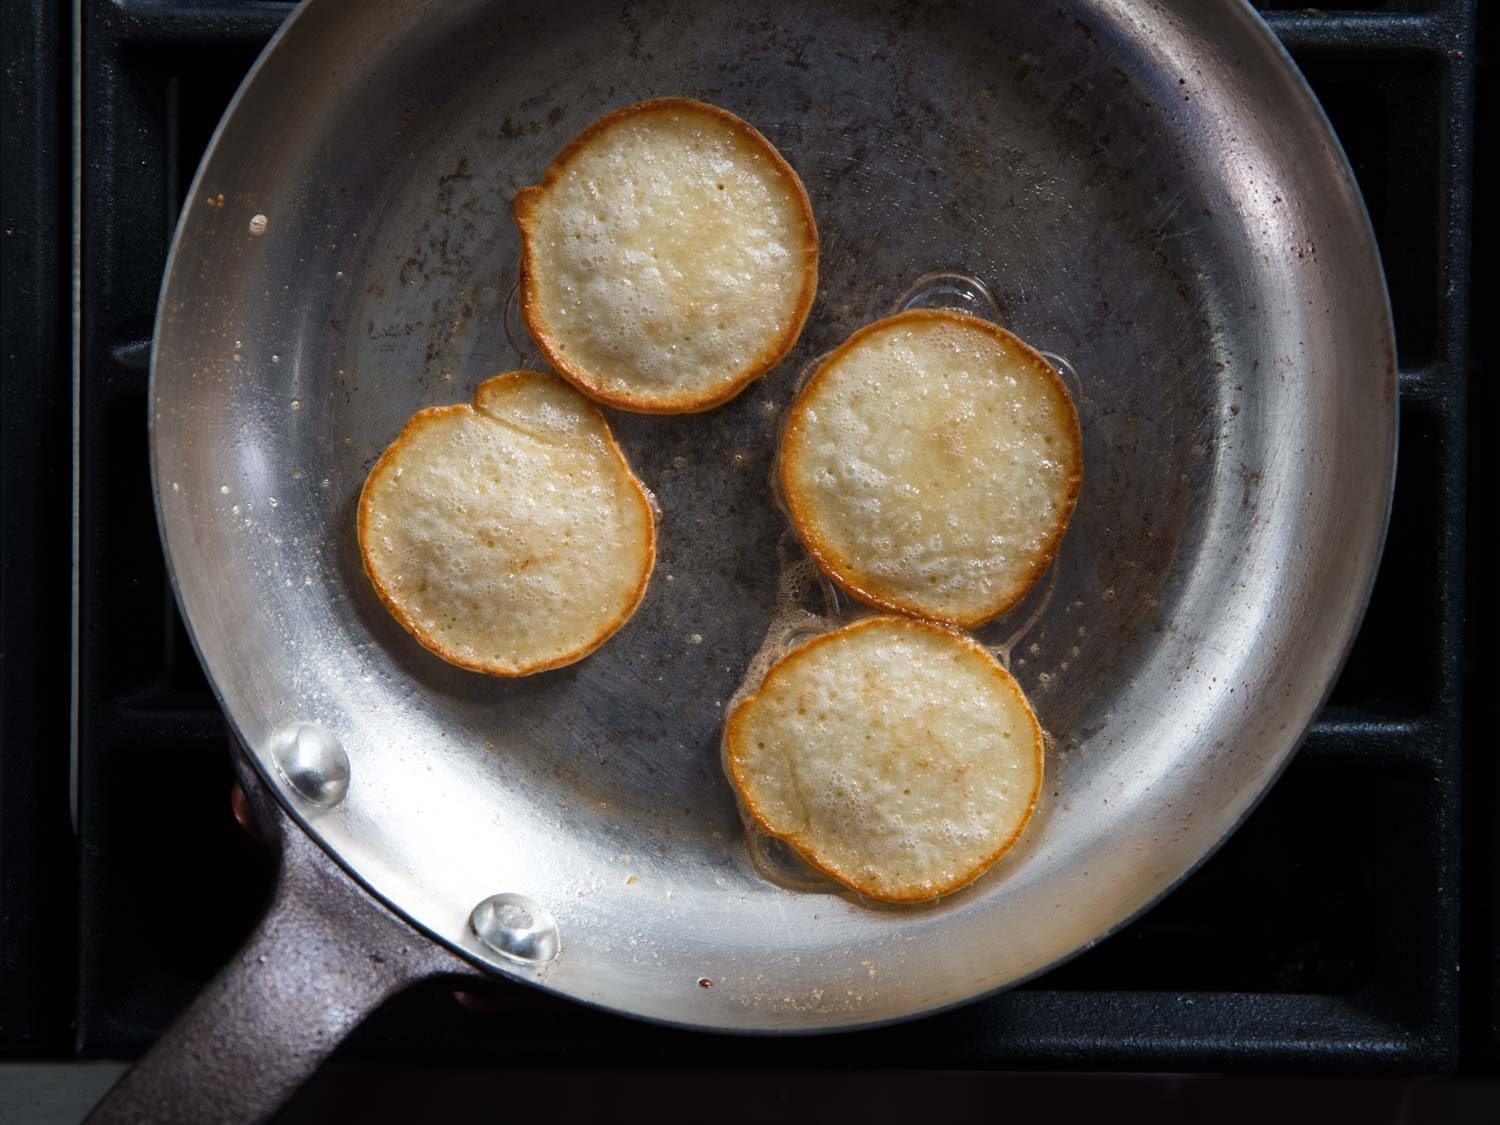 Blini cooking in a copper skillet, showing even browning